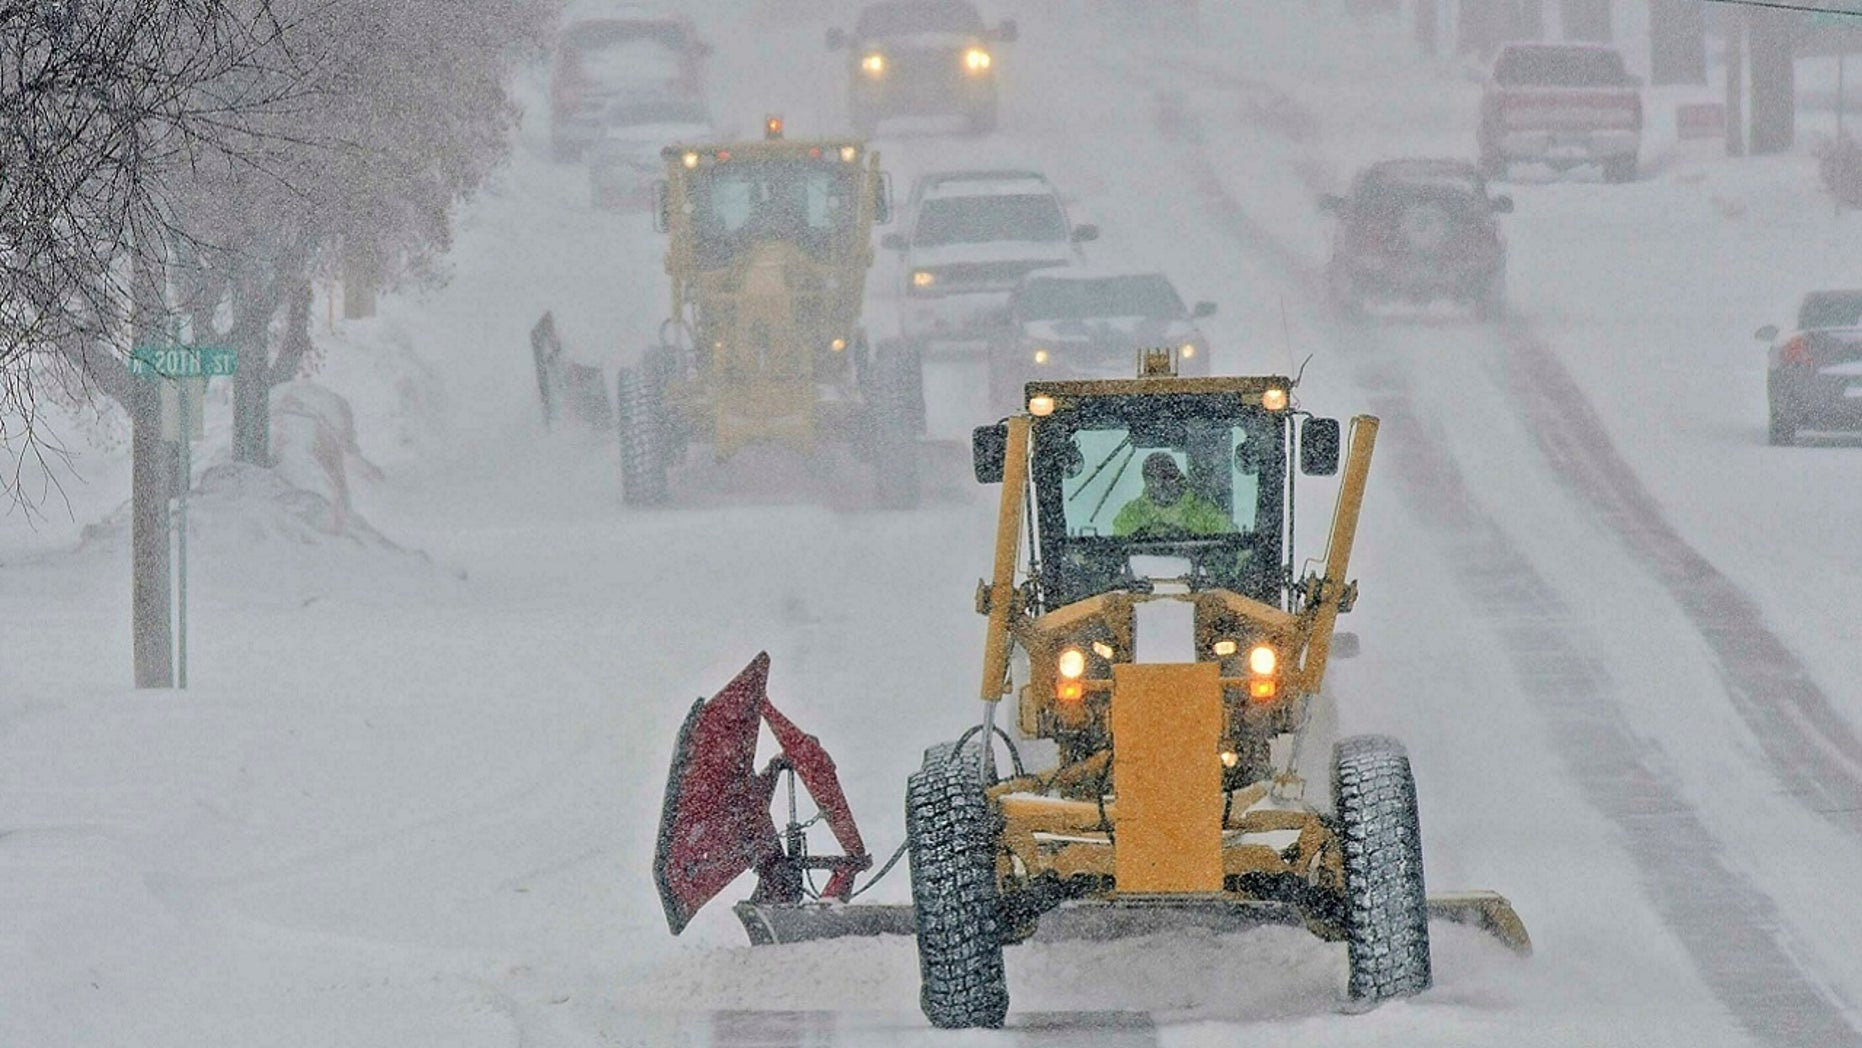 Winter storm sweeping across US, with more than 100M Americans in its path